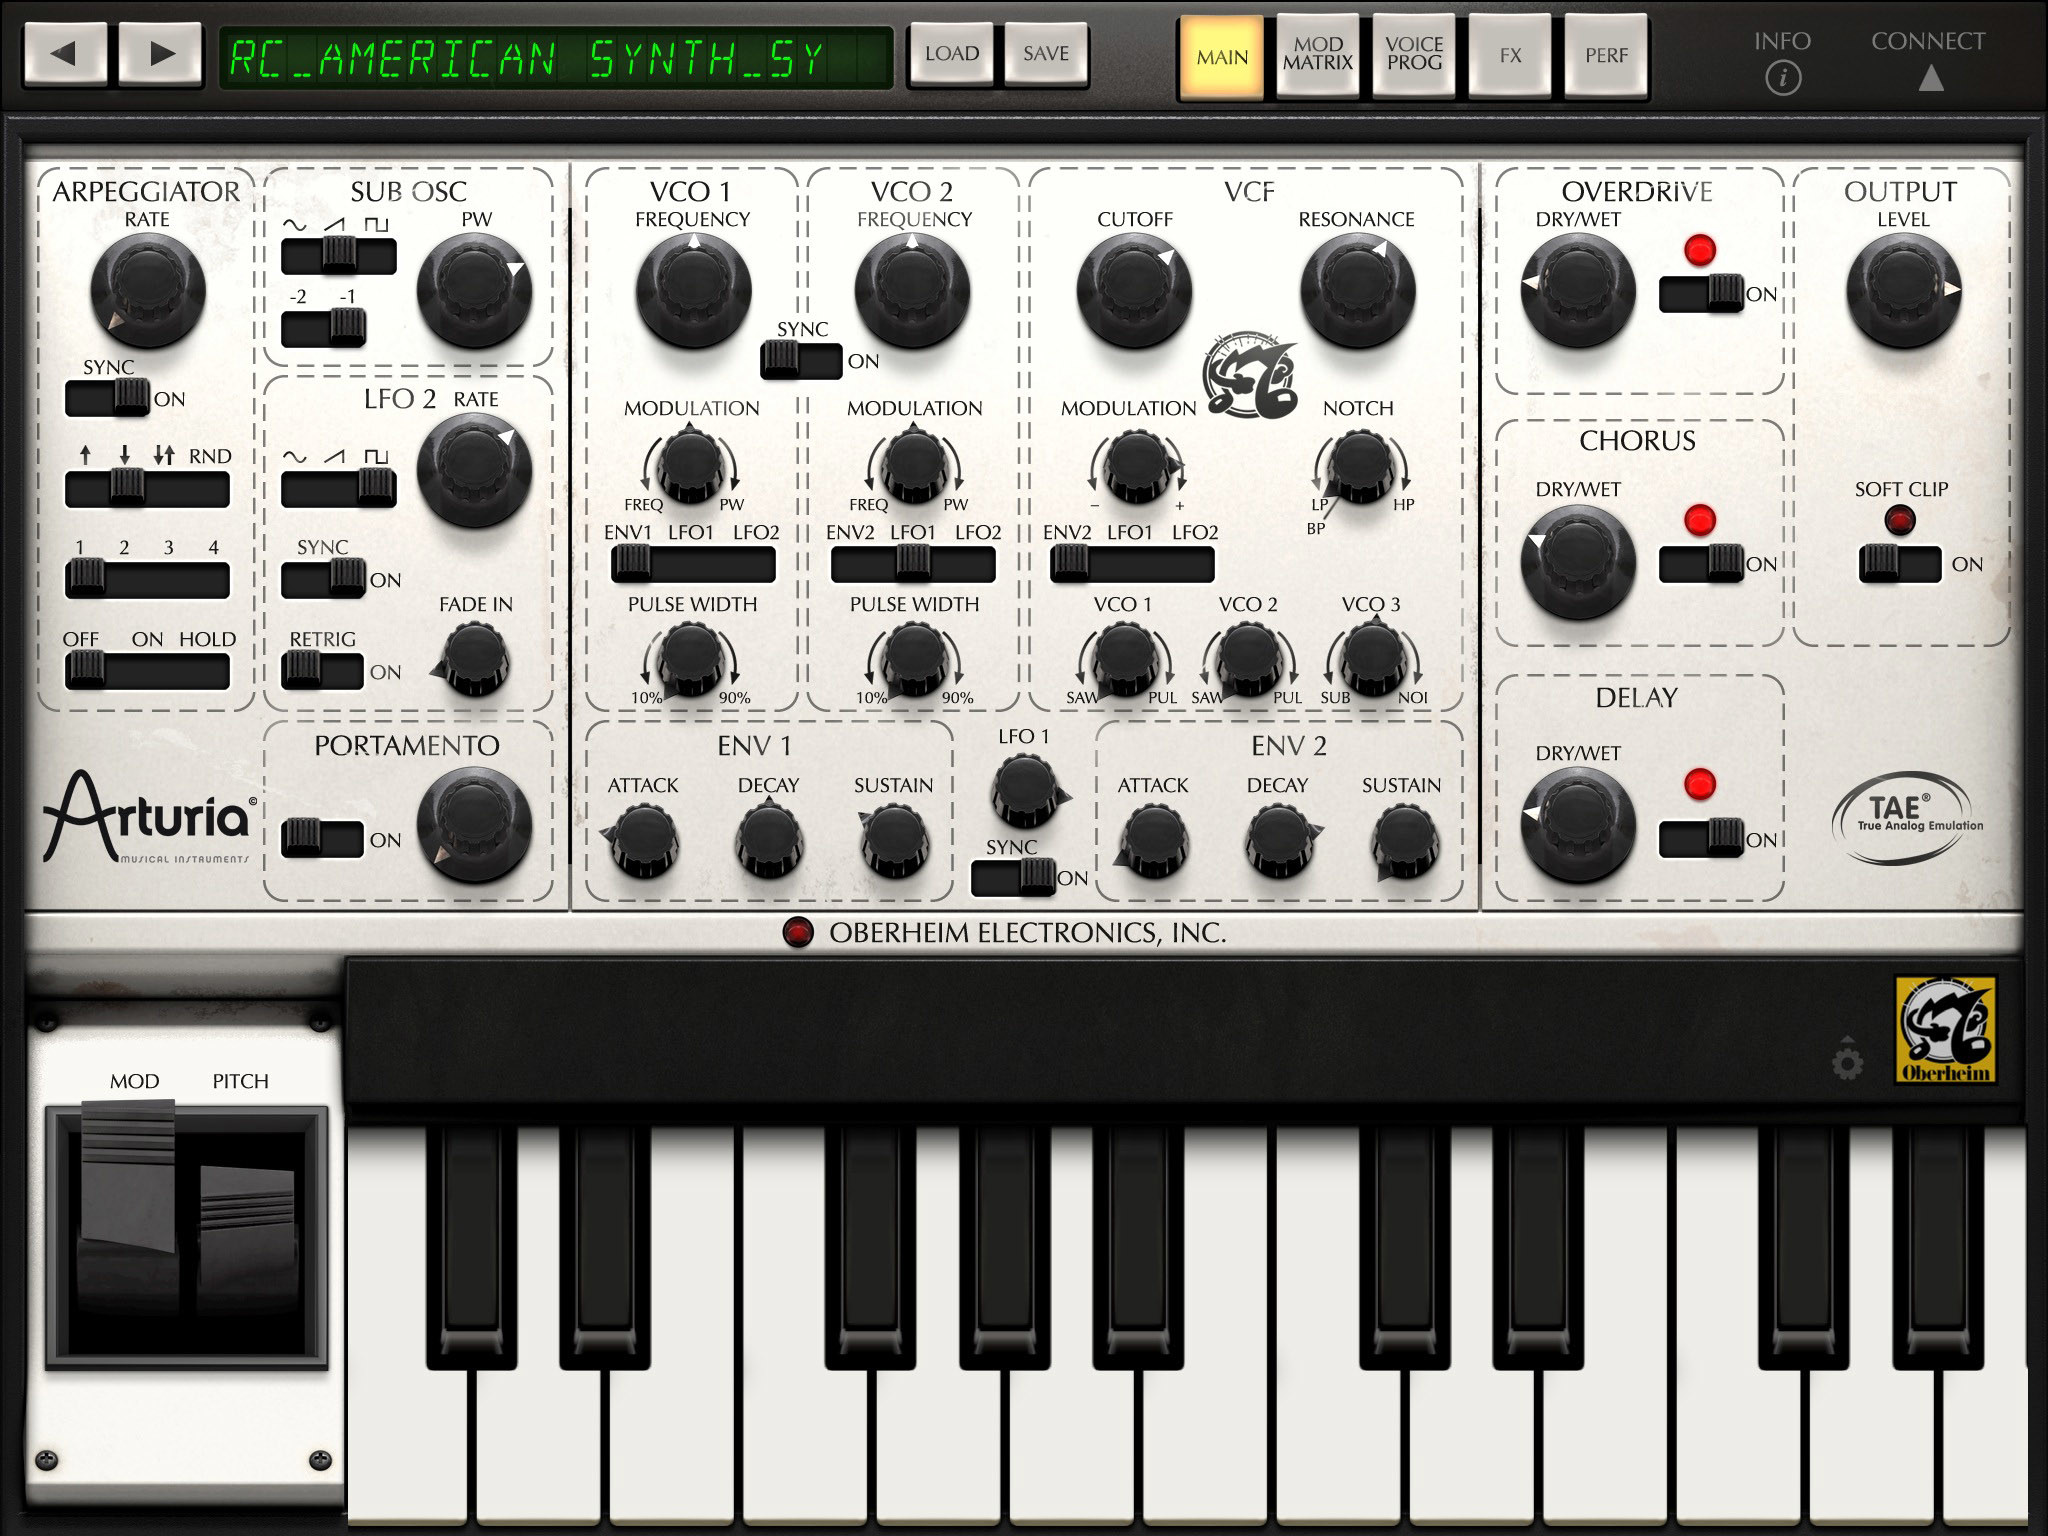 2048x1536 iSEM's main screen certainly captures the look of the original hardware  synth.